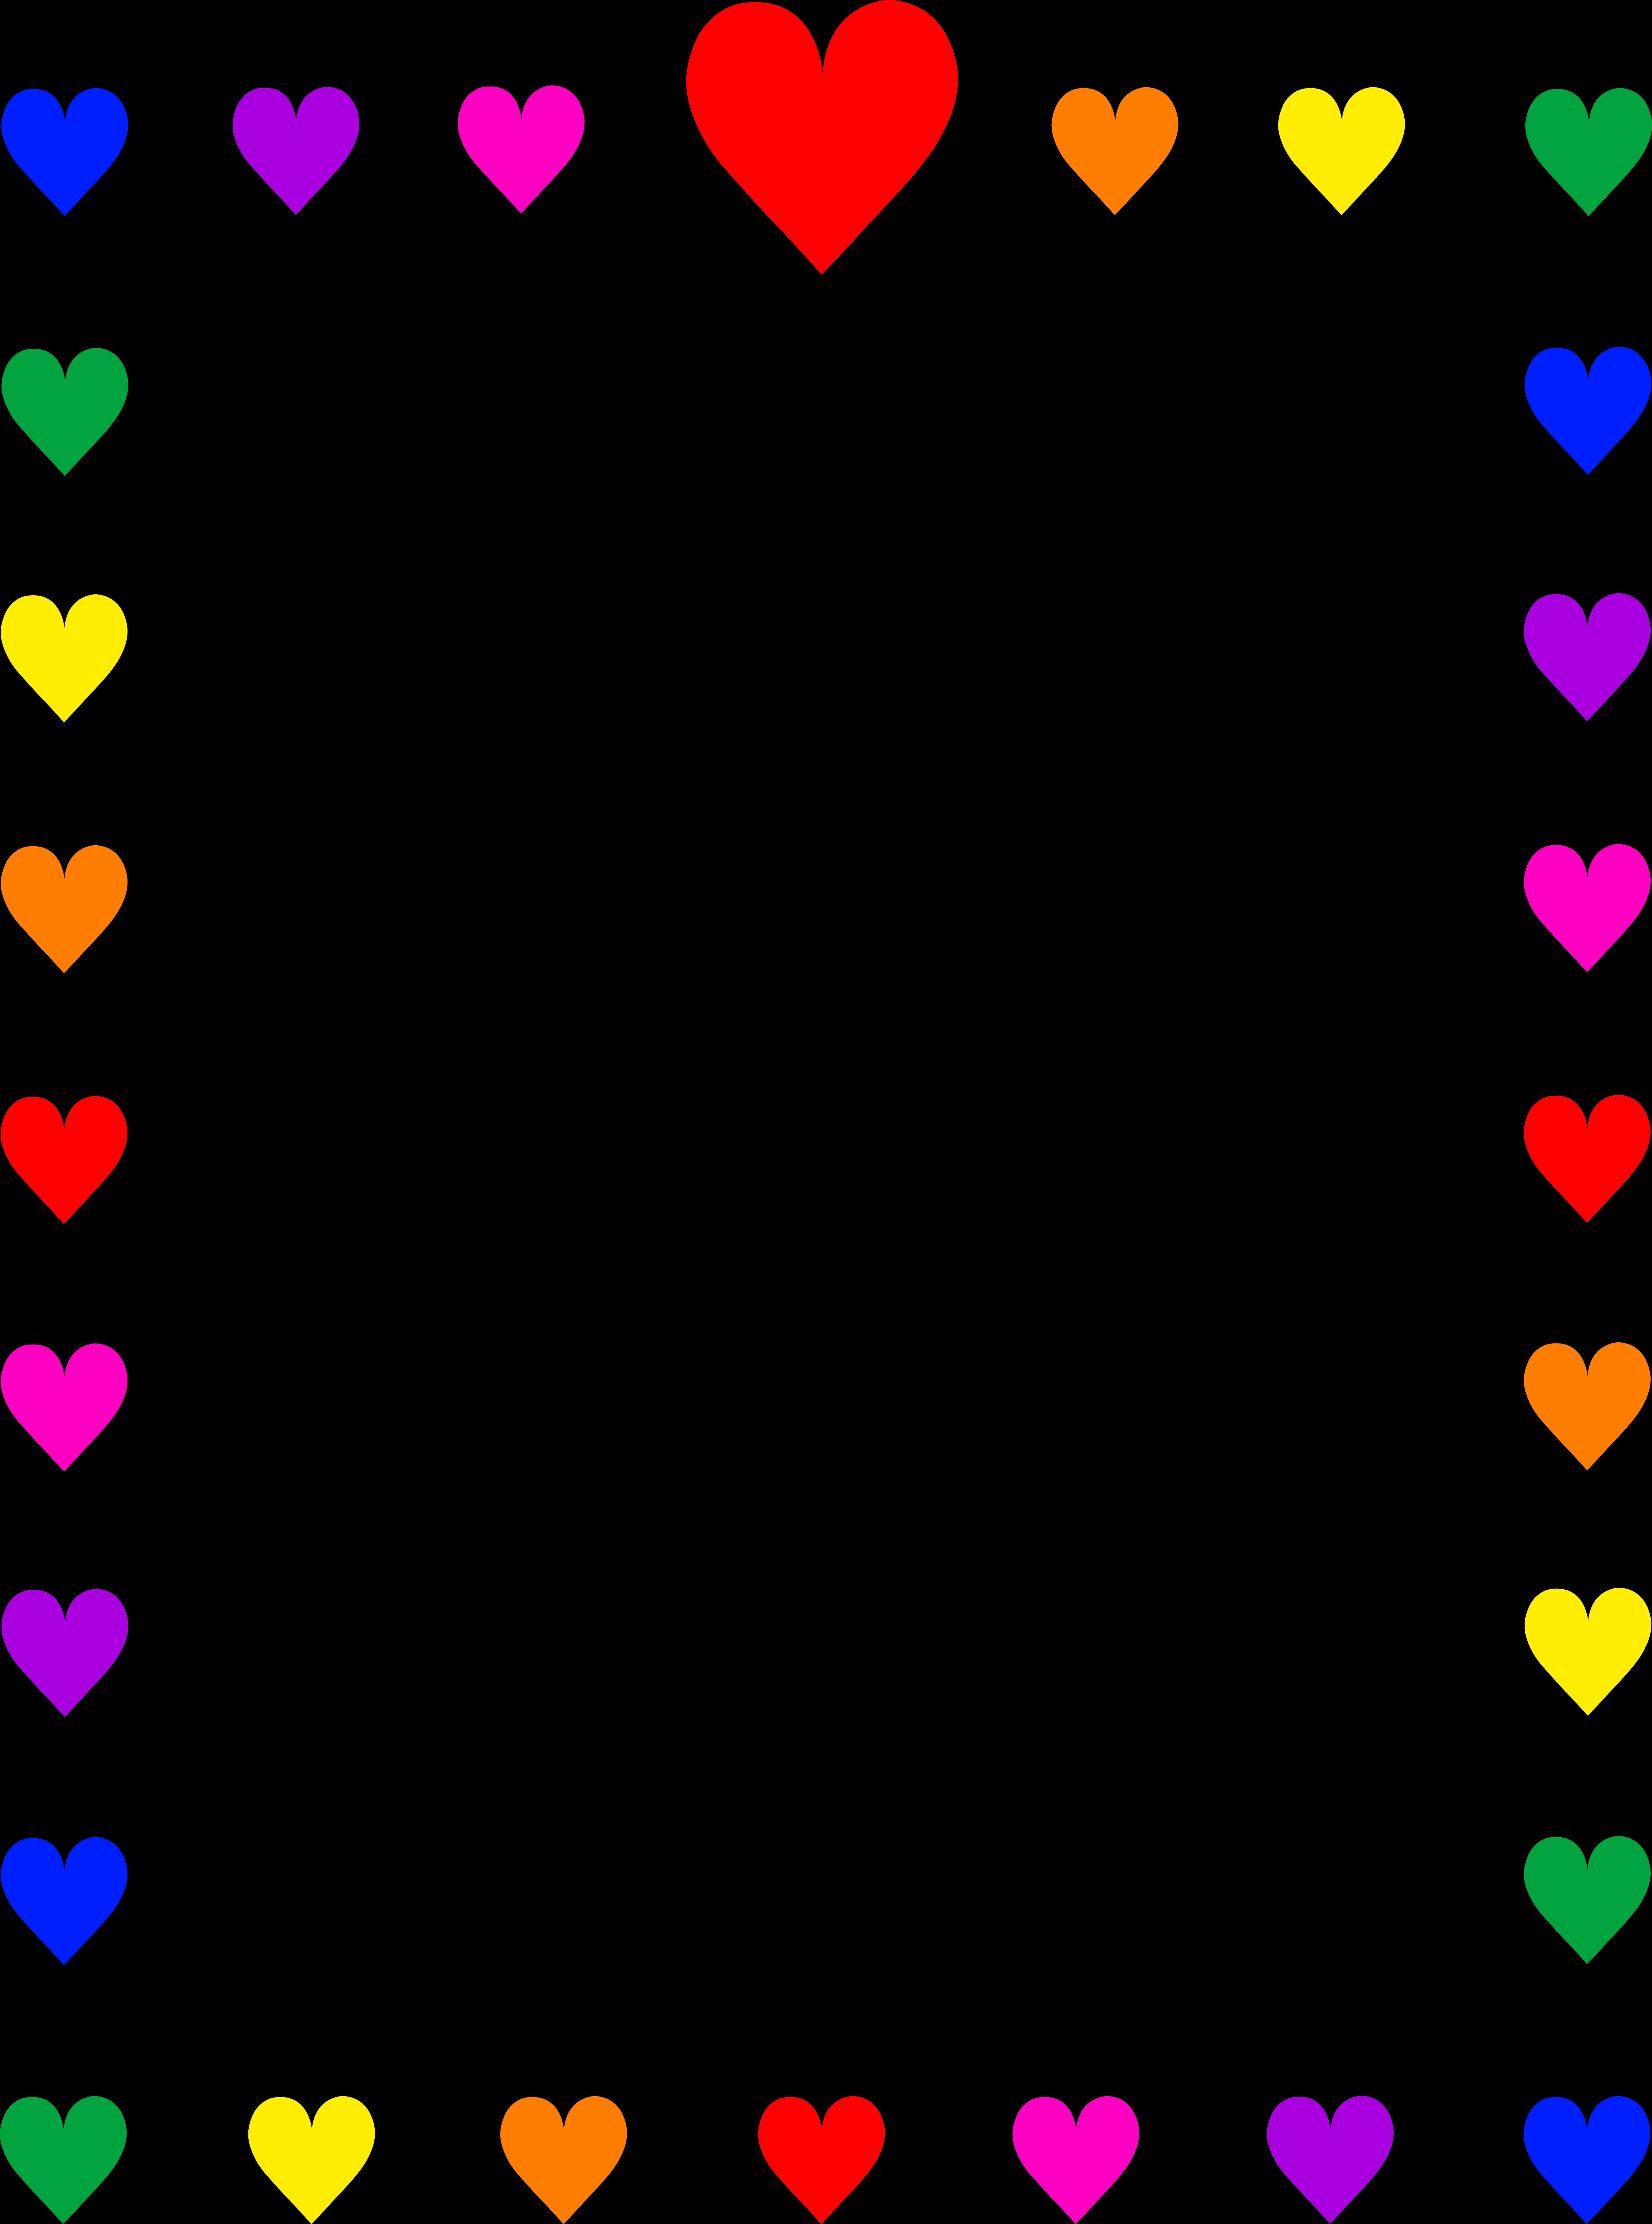 Colorful Hearts Border Design PNG